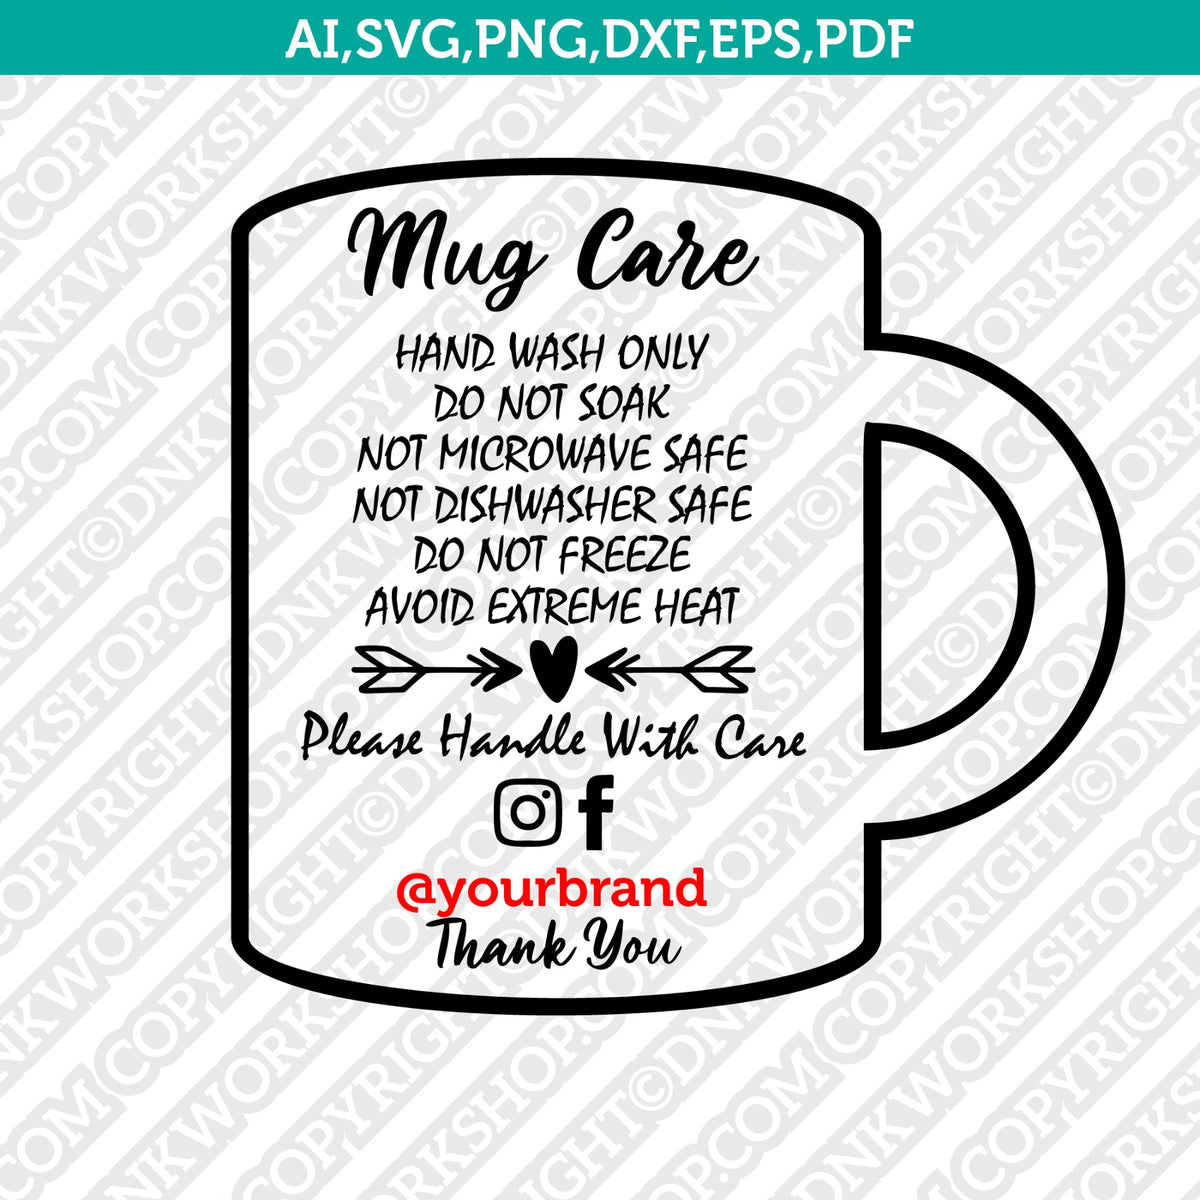 FLORAL CUP CARE INSTRUCTION CARDS, TUMBLERS AND MUG CARE